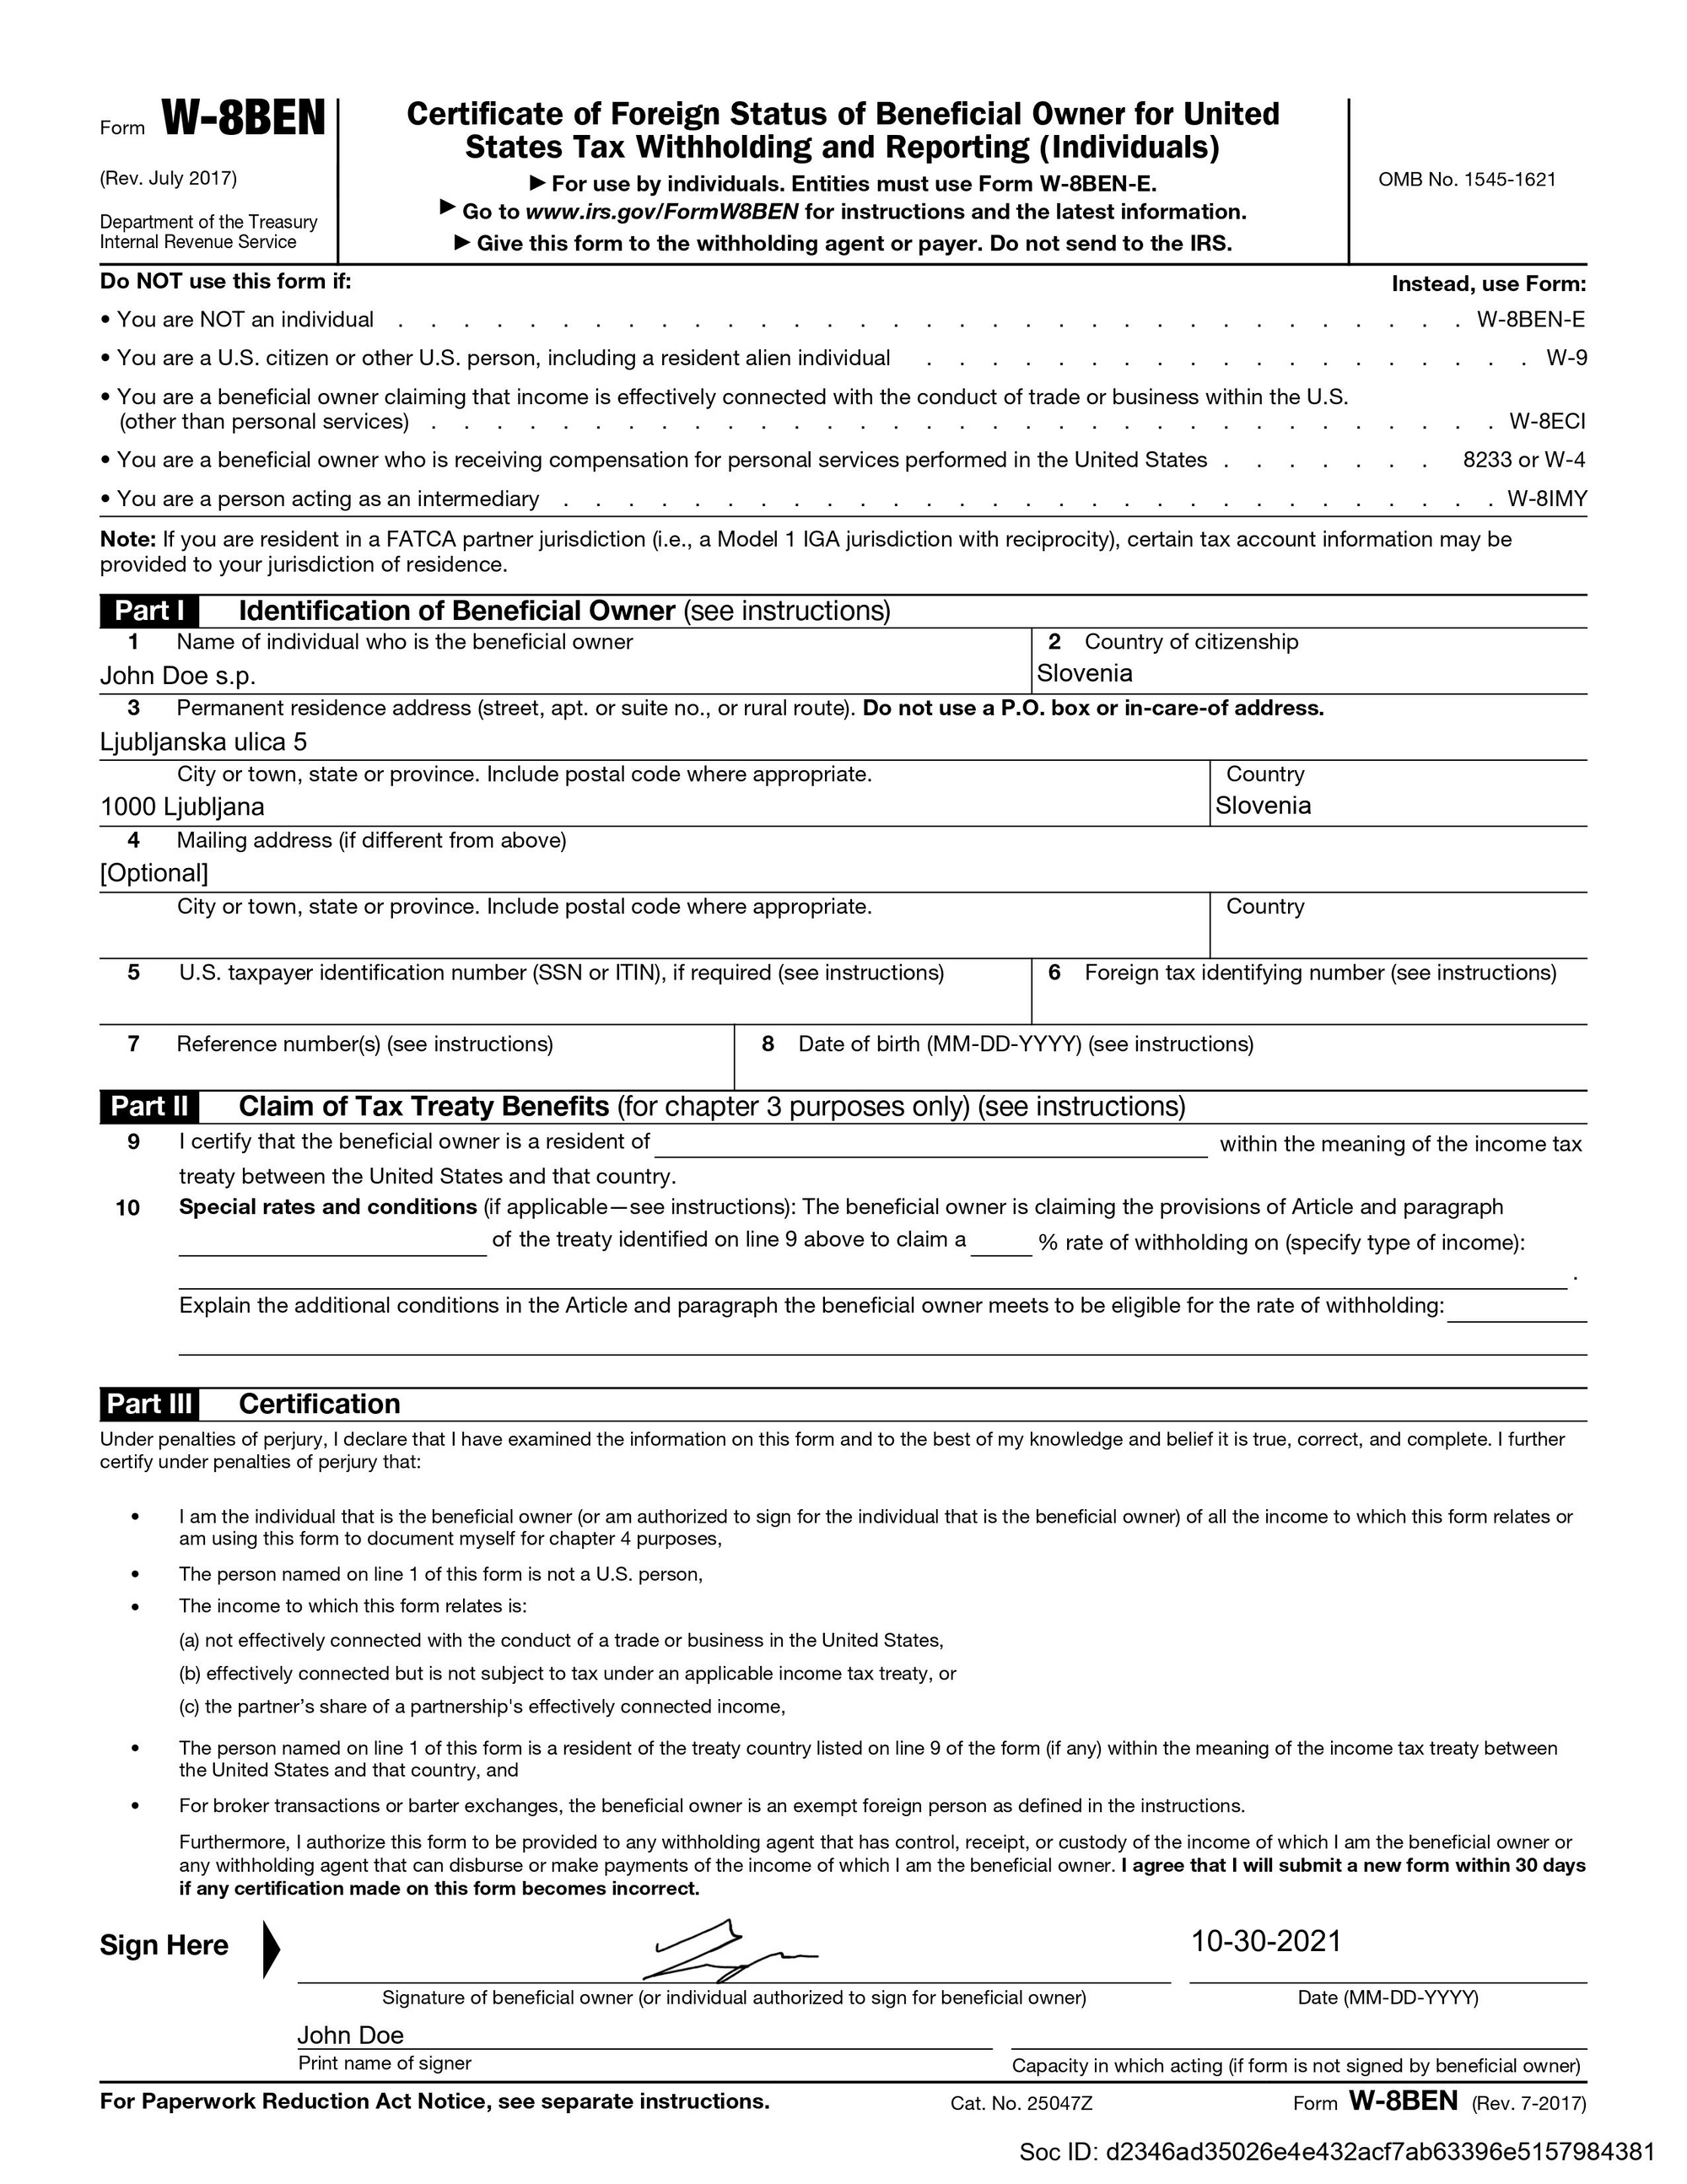 How Should An Engineer Fill Out W 8BEN Form?